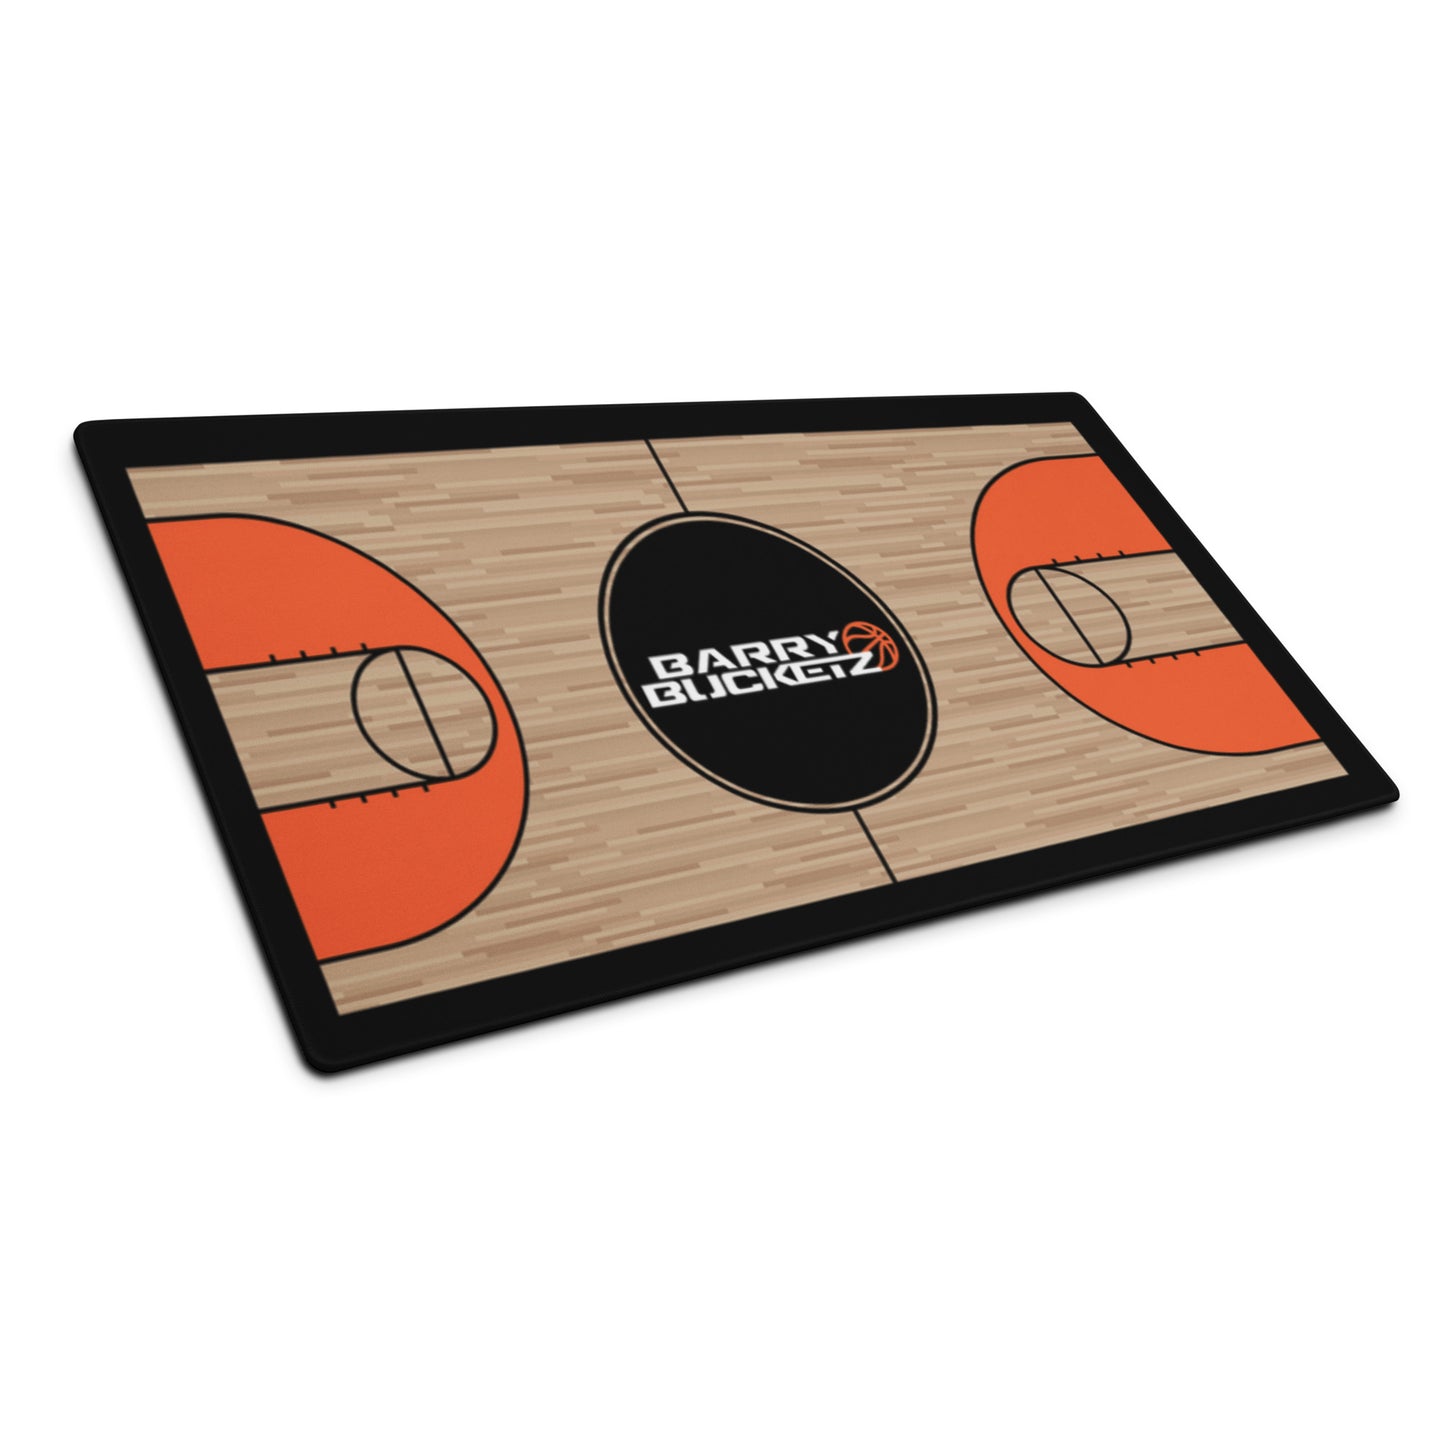 BARRY BUCKETZ MOUSE PAD